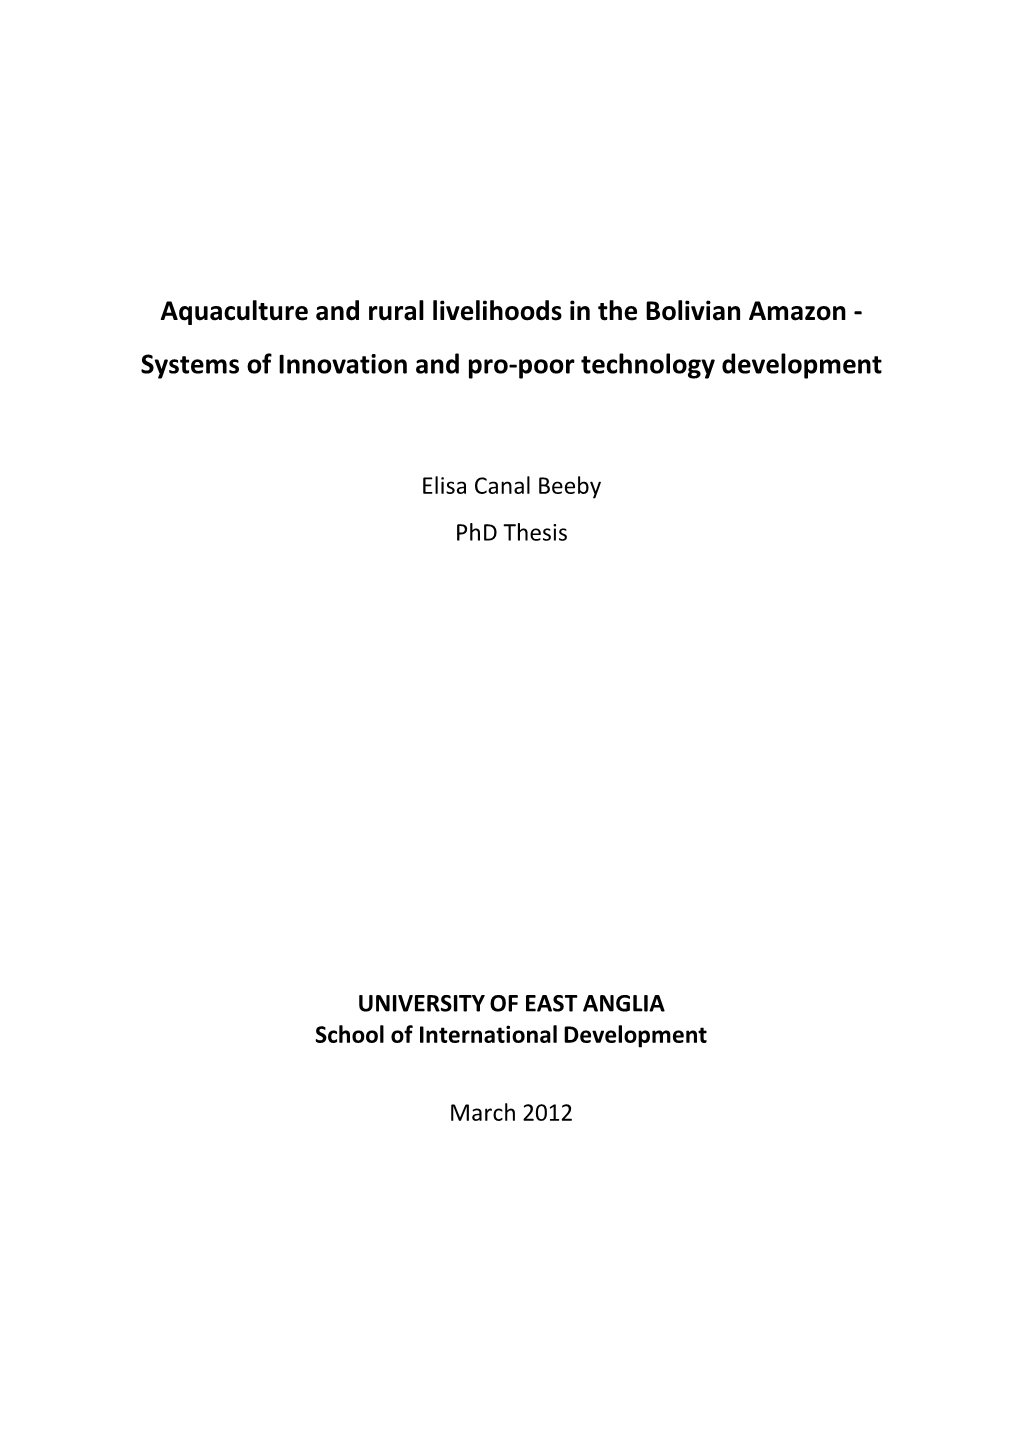 Aquaculture and Rural Livelihoods in the Bolivian Amazon